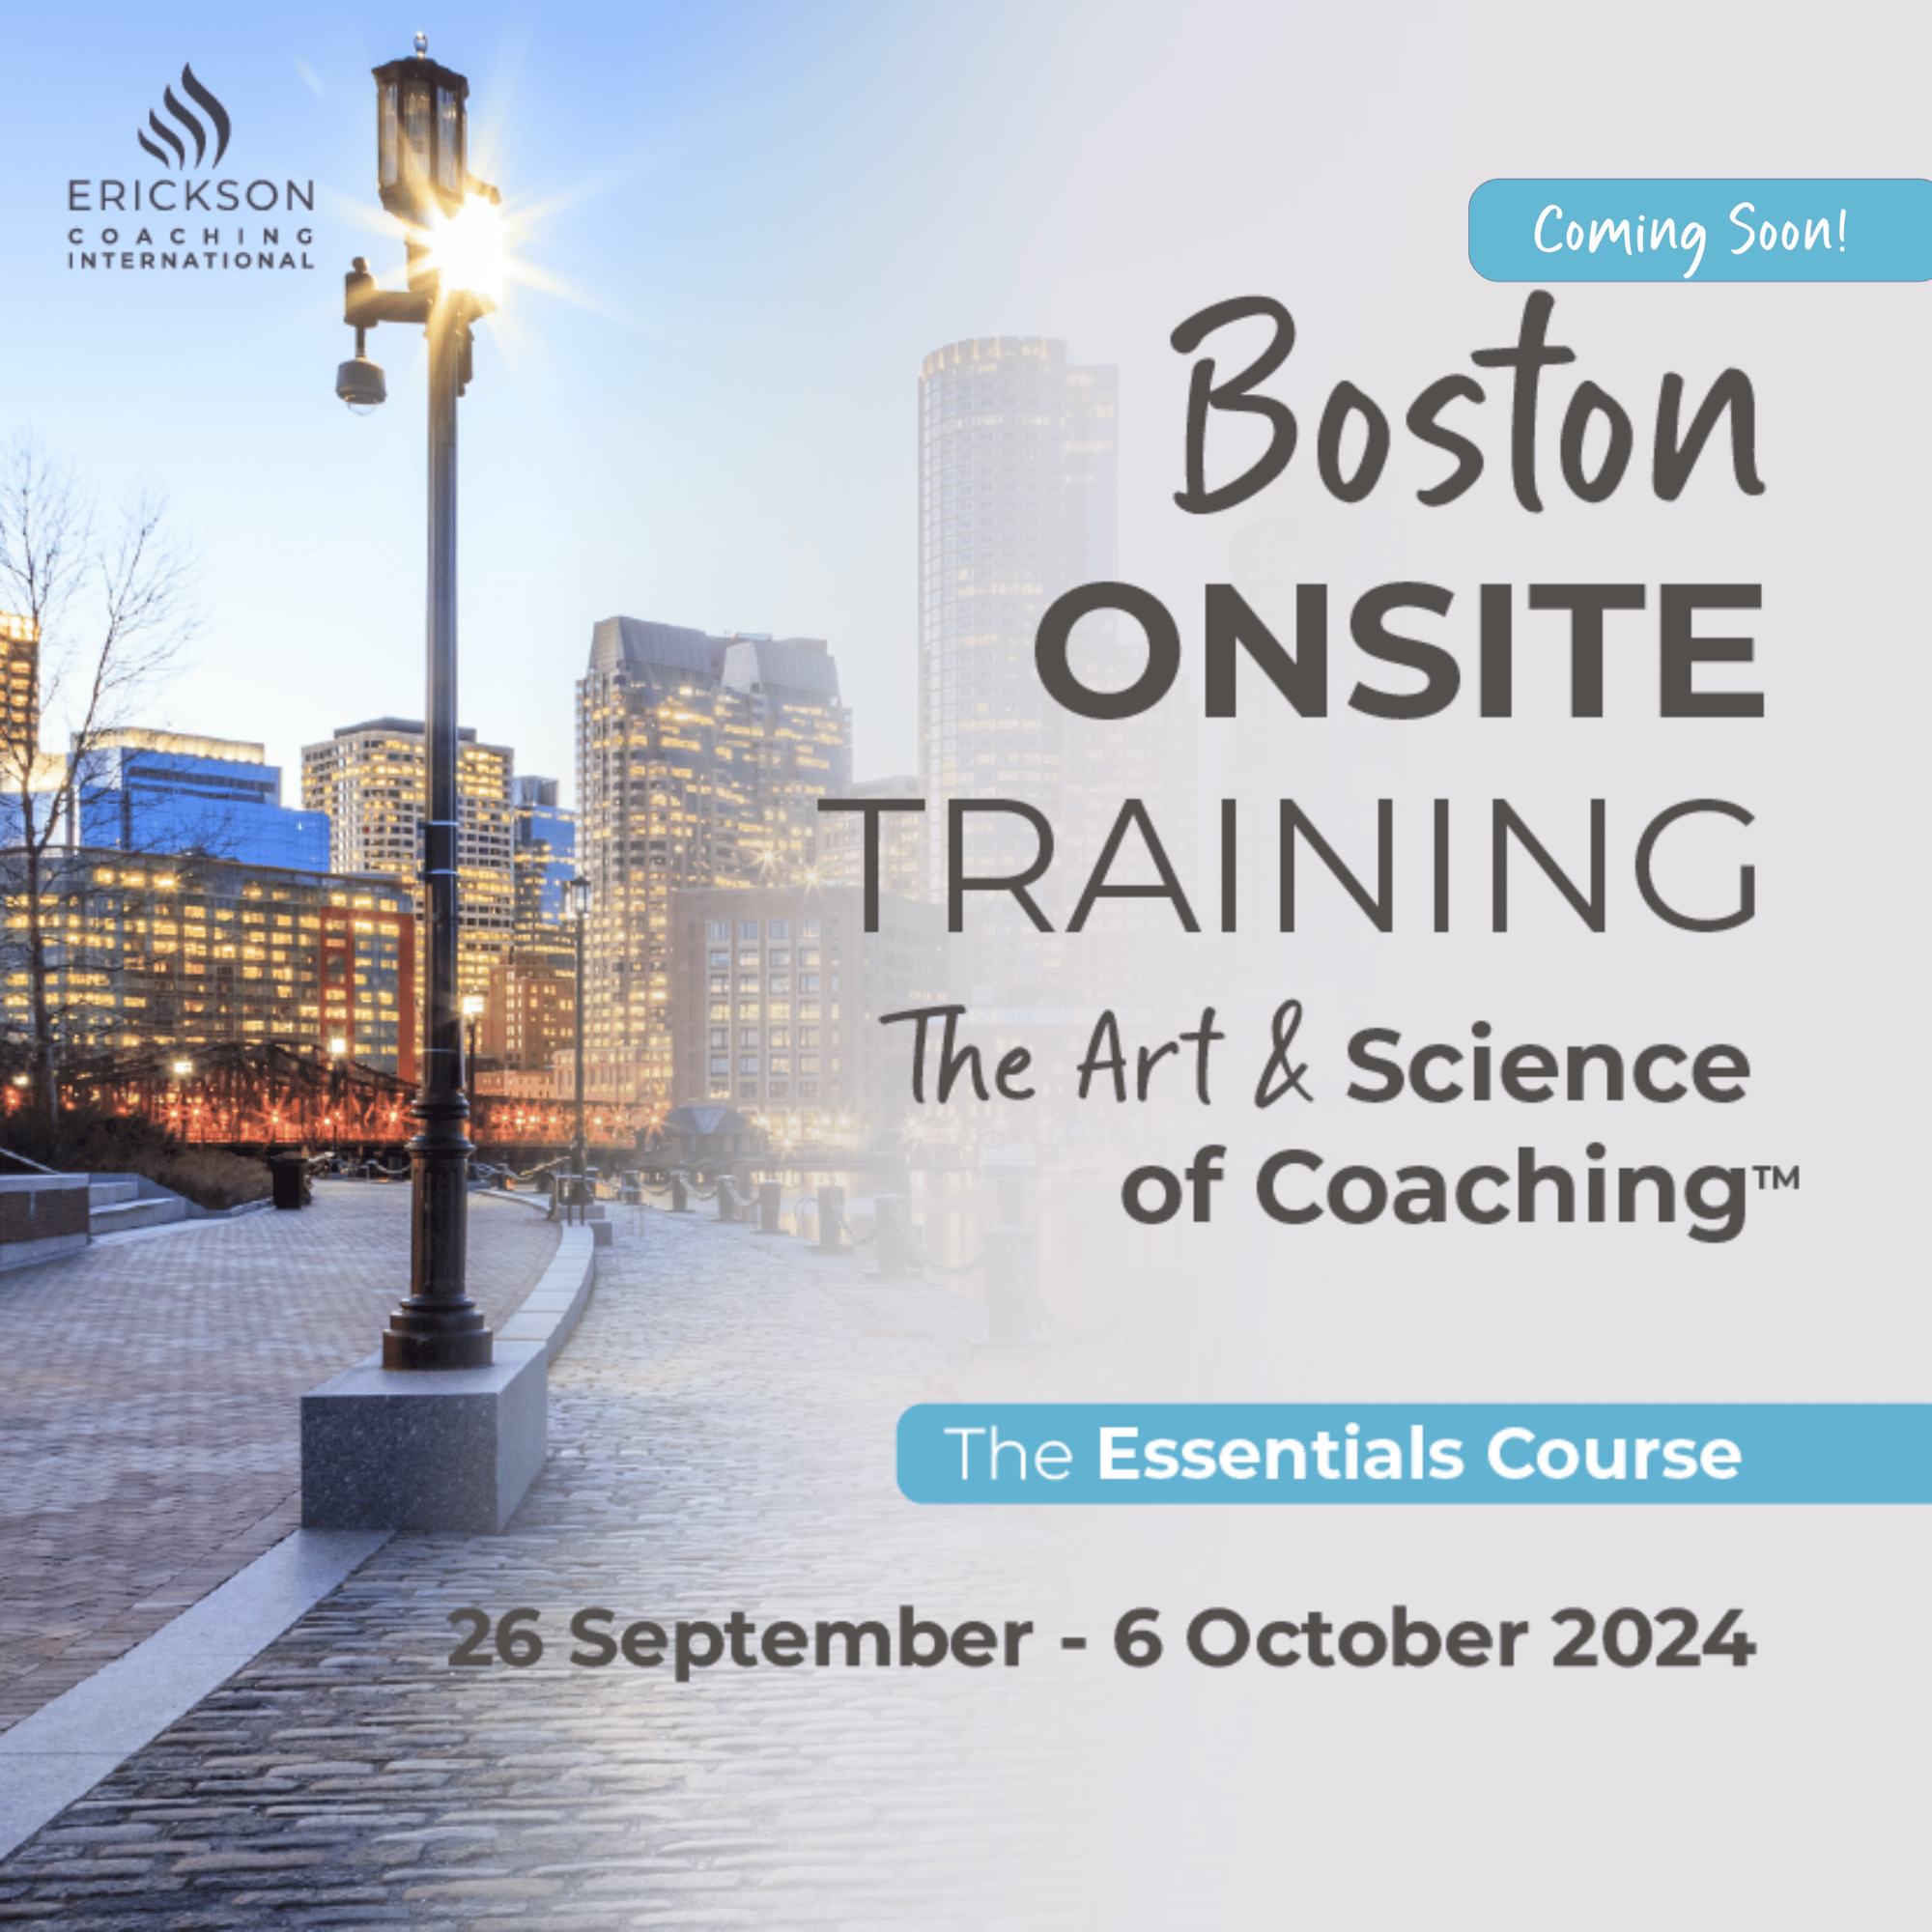 Boston onsite coach training - the art and science of coaching 